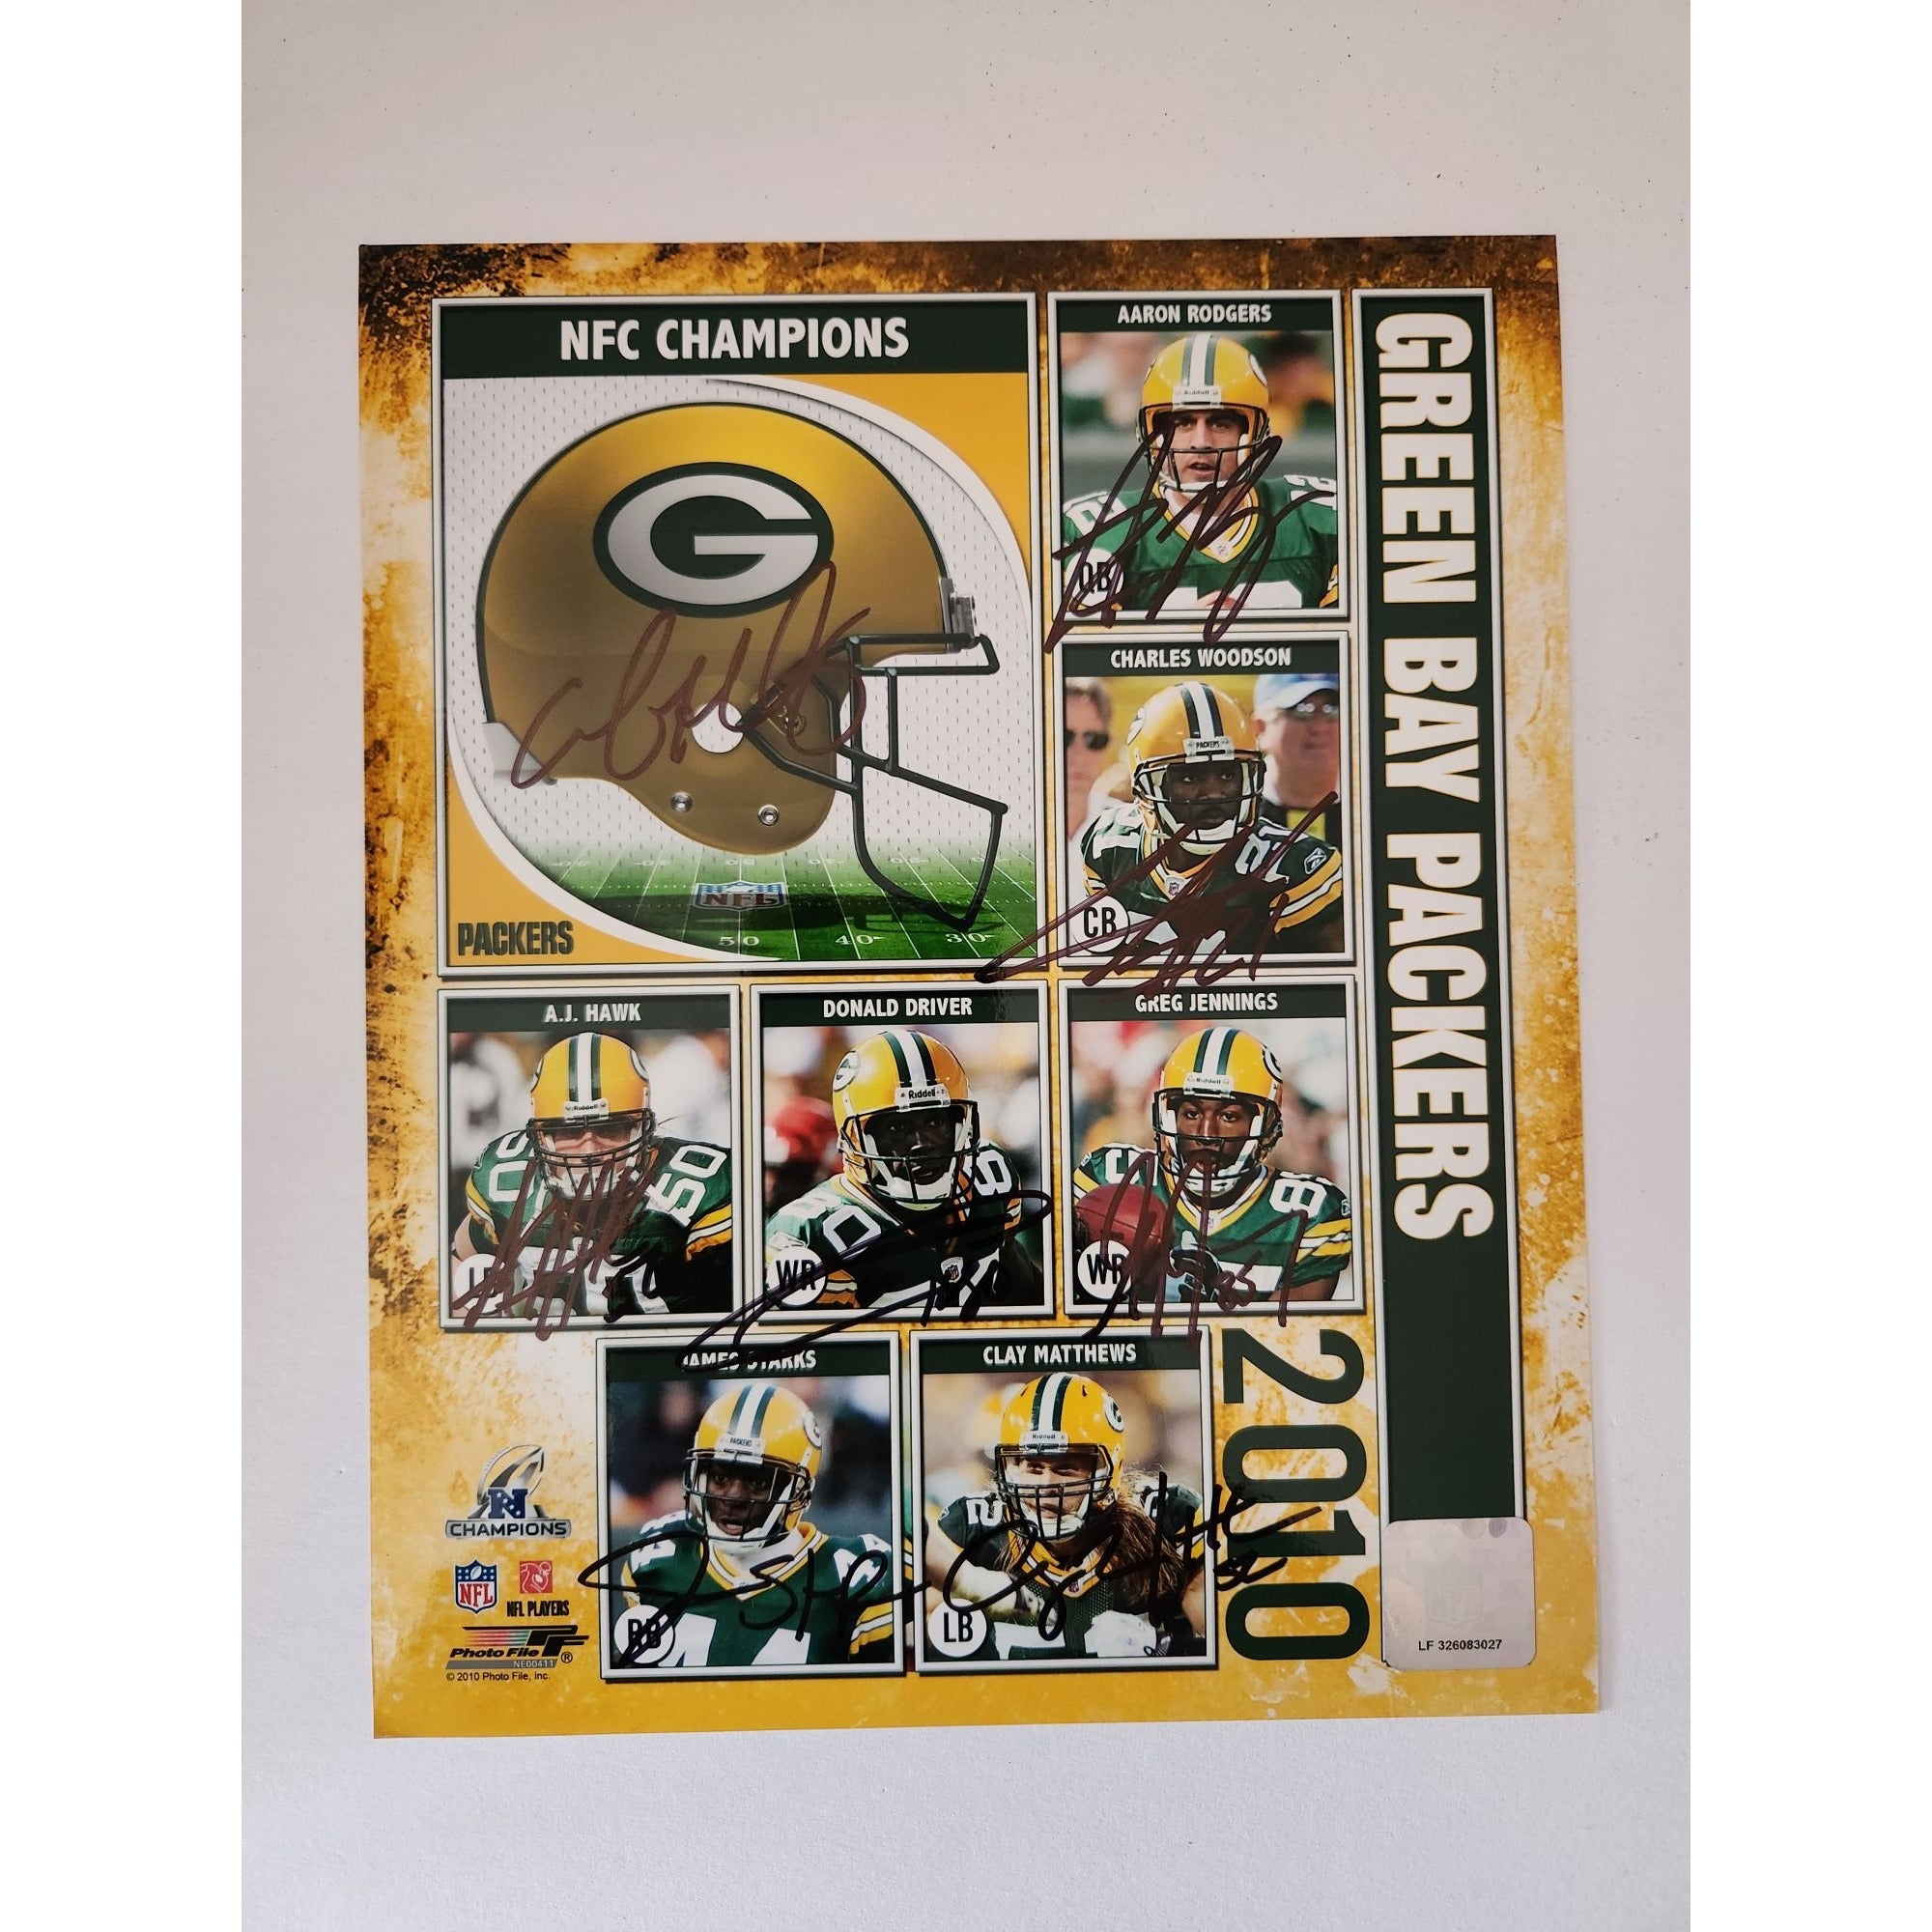 Green Bay Packers Aaron Rodgers Charles Woodson Clay Matthews 8x10 photo signed